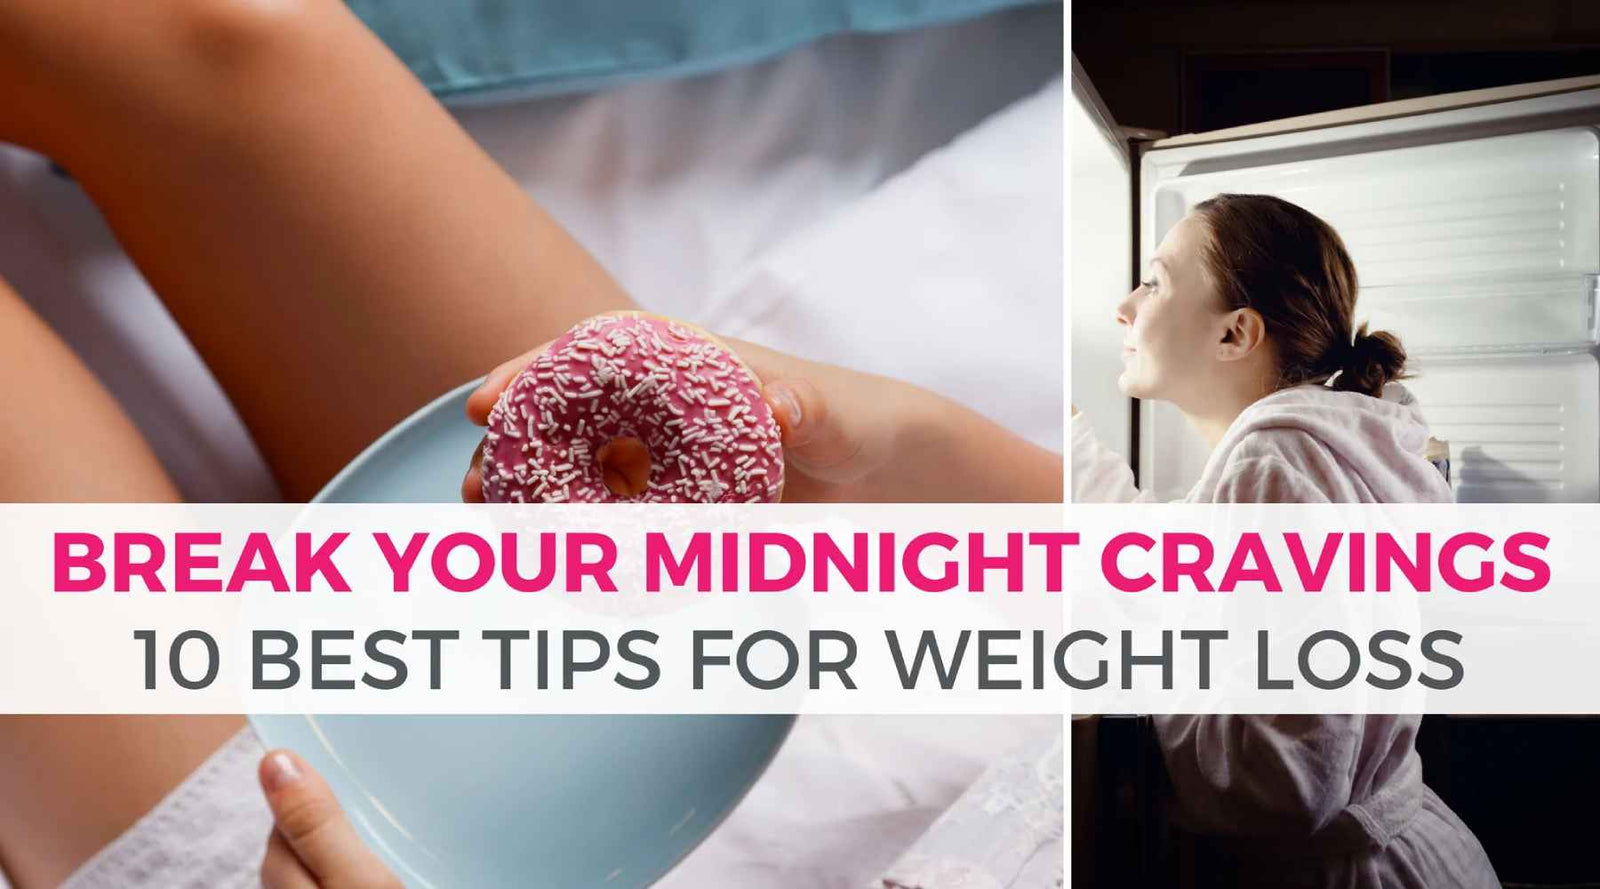 8 Ways to Stop Late-Night Cravings – 1 Up Nutrition